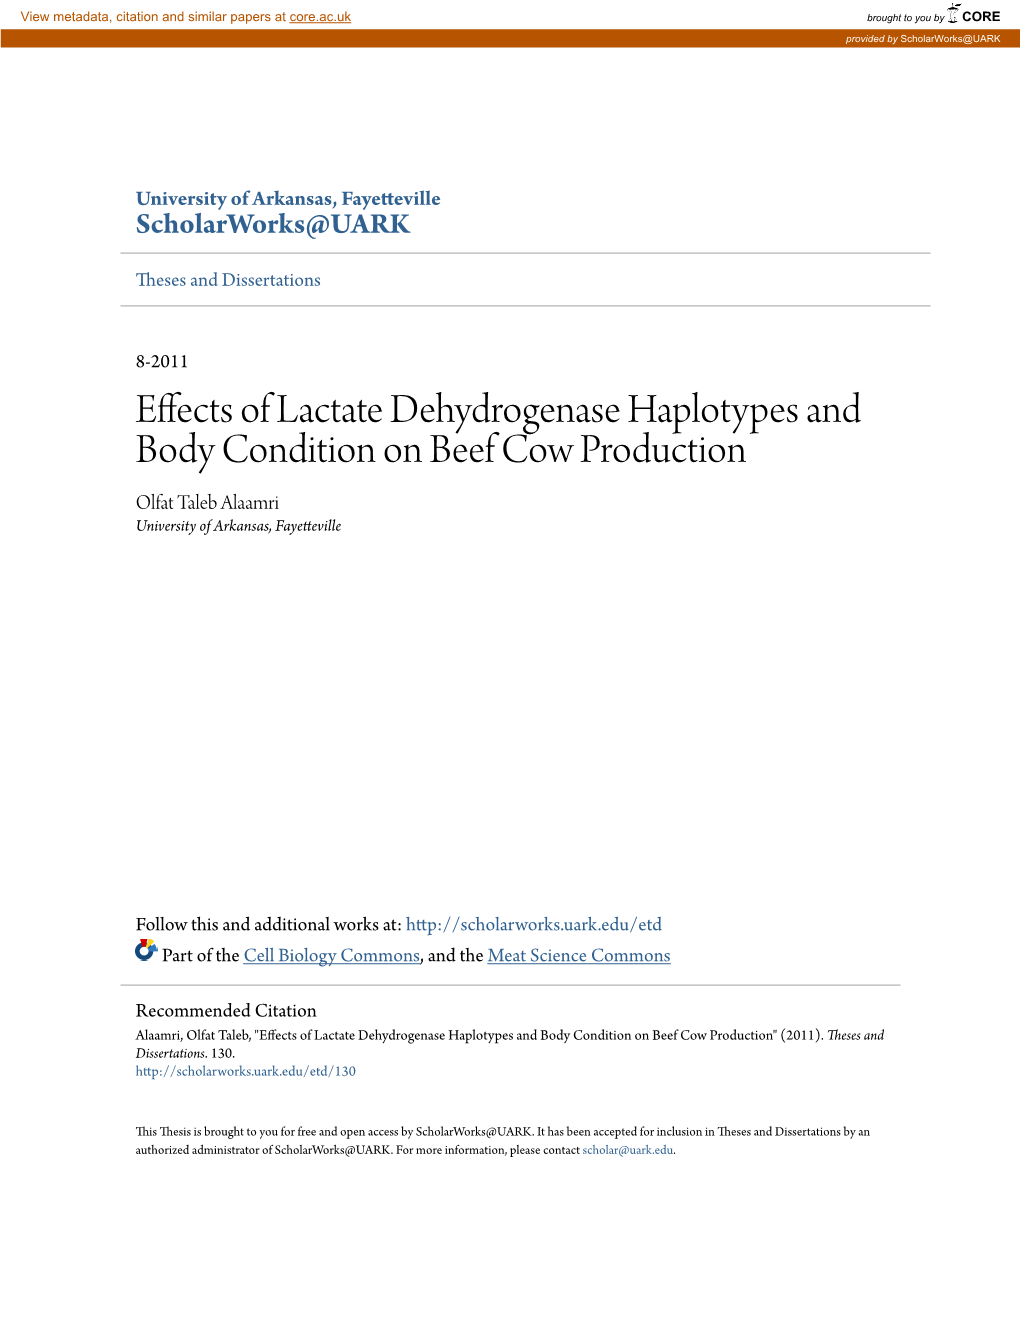 Effects of Lactate Dehydrogenase Haplotypes and Body Condition on Beef Cow Production Olfat Taleb Alaamri University of Arkansas, Fayetteville